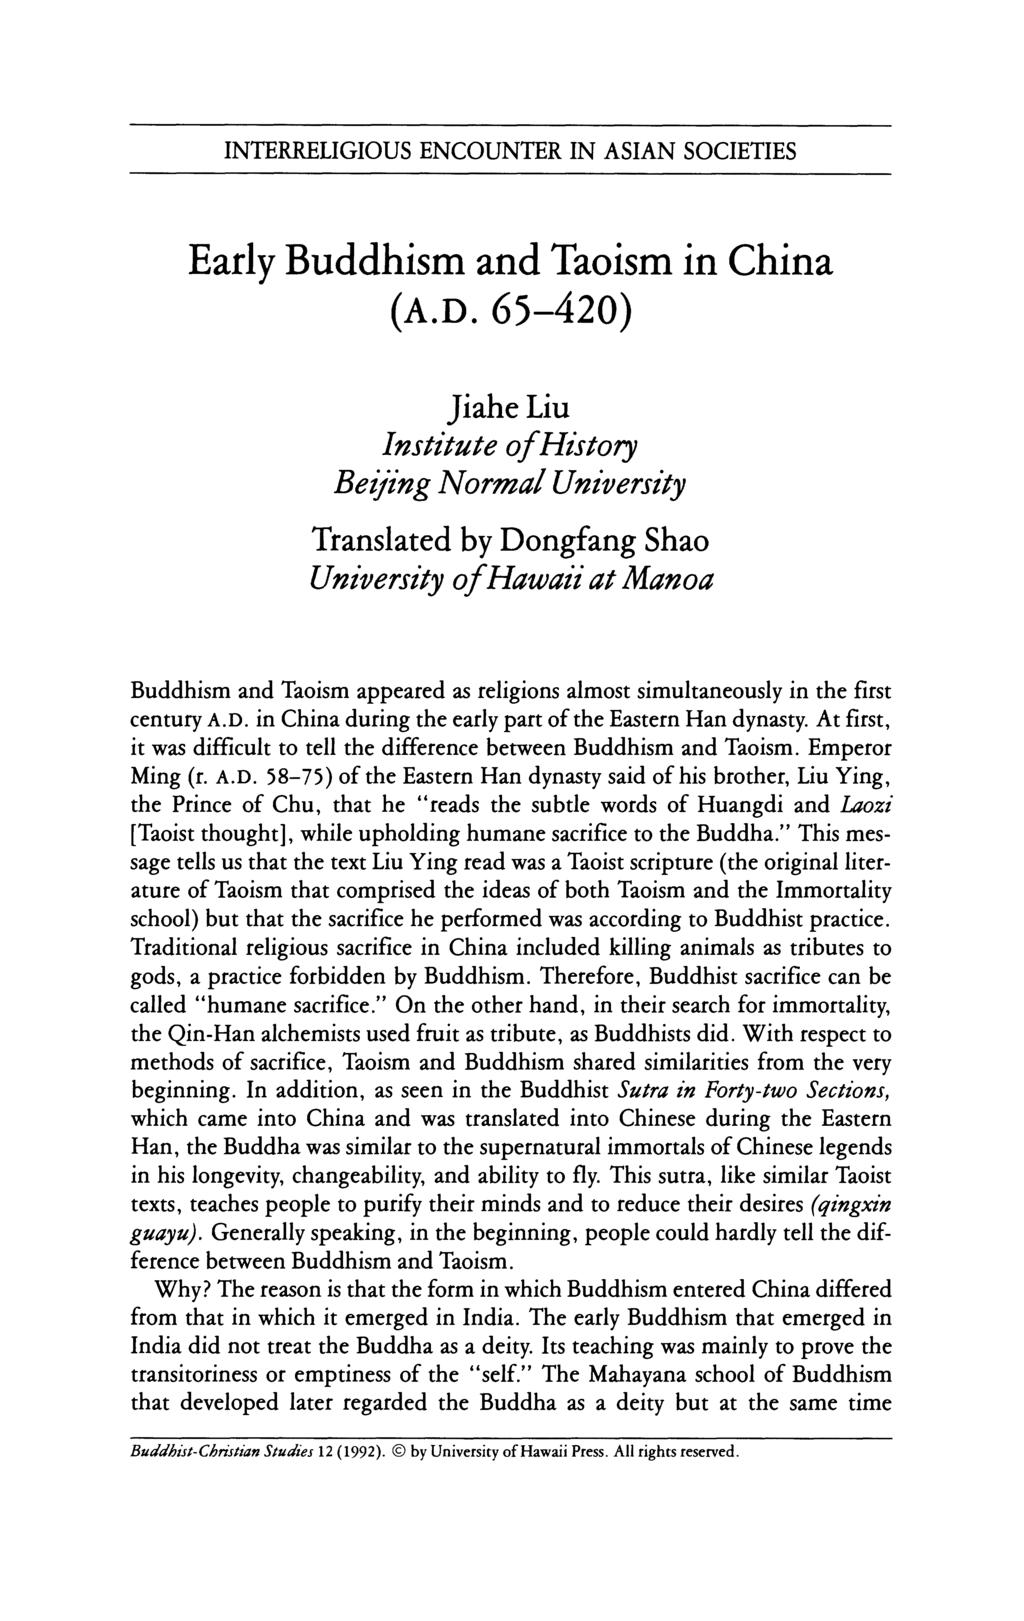 INTERRELIGIOUS ENCOUNTER IN ASIAN SOCIETIES Early Buddhism and Taoism in China (A.D.